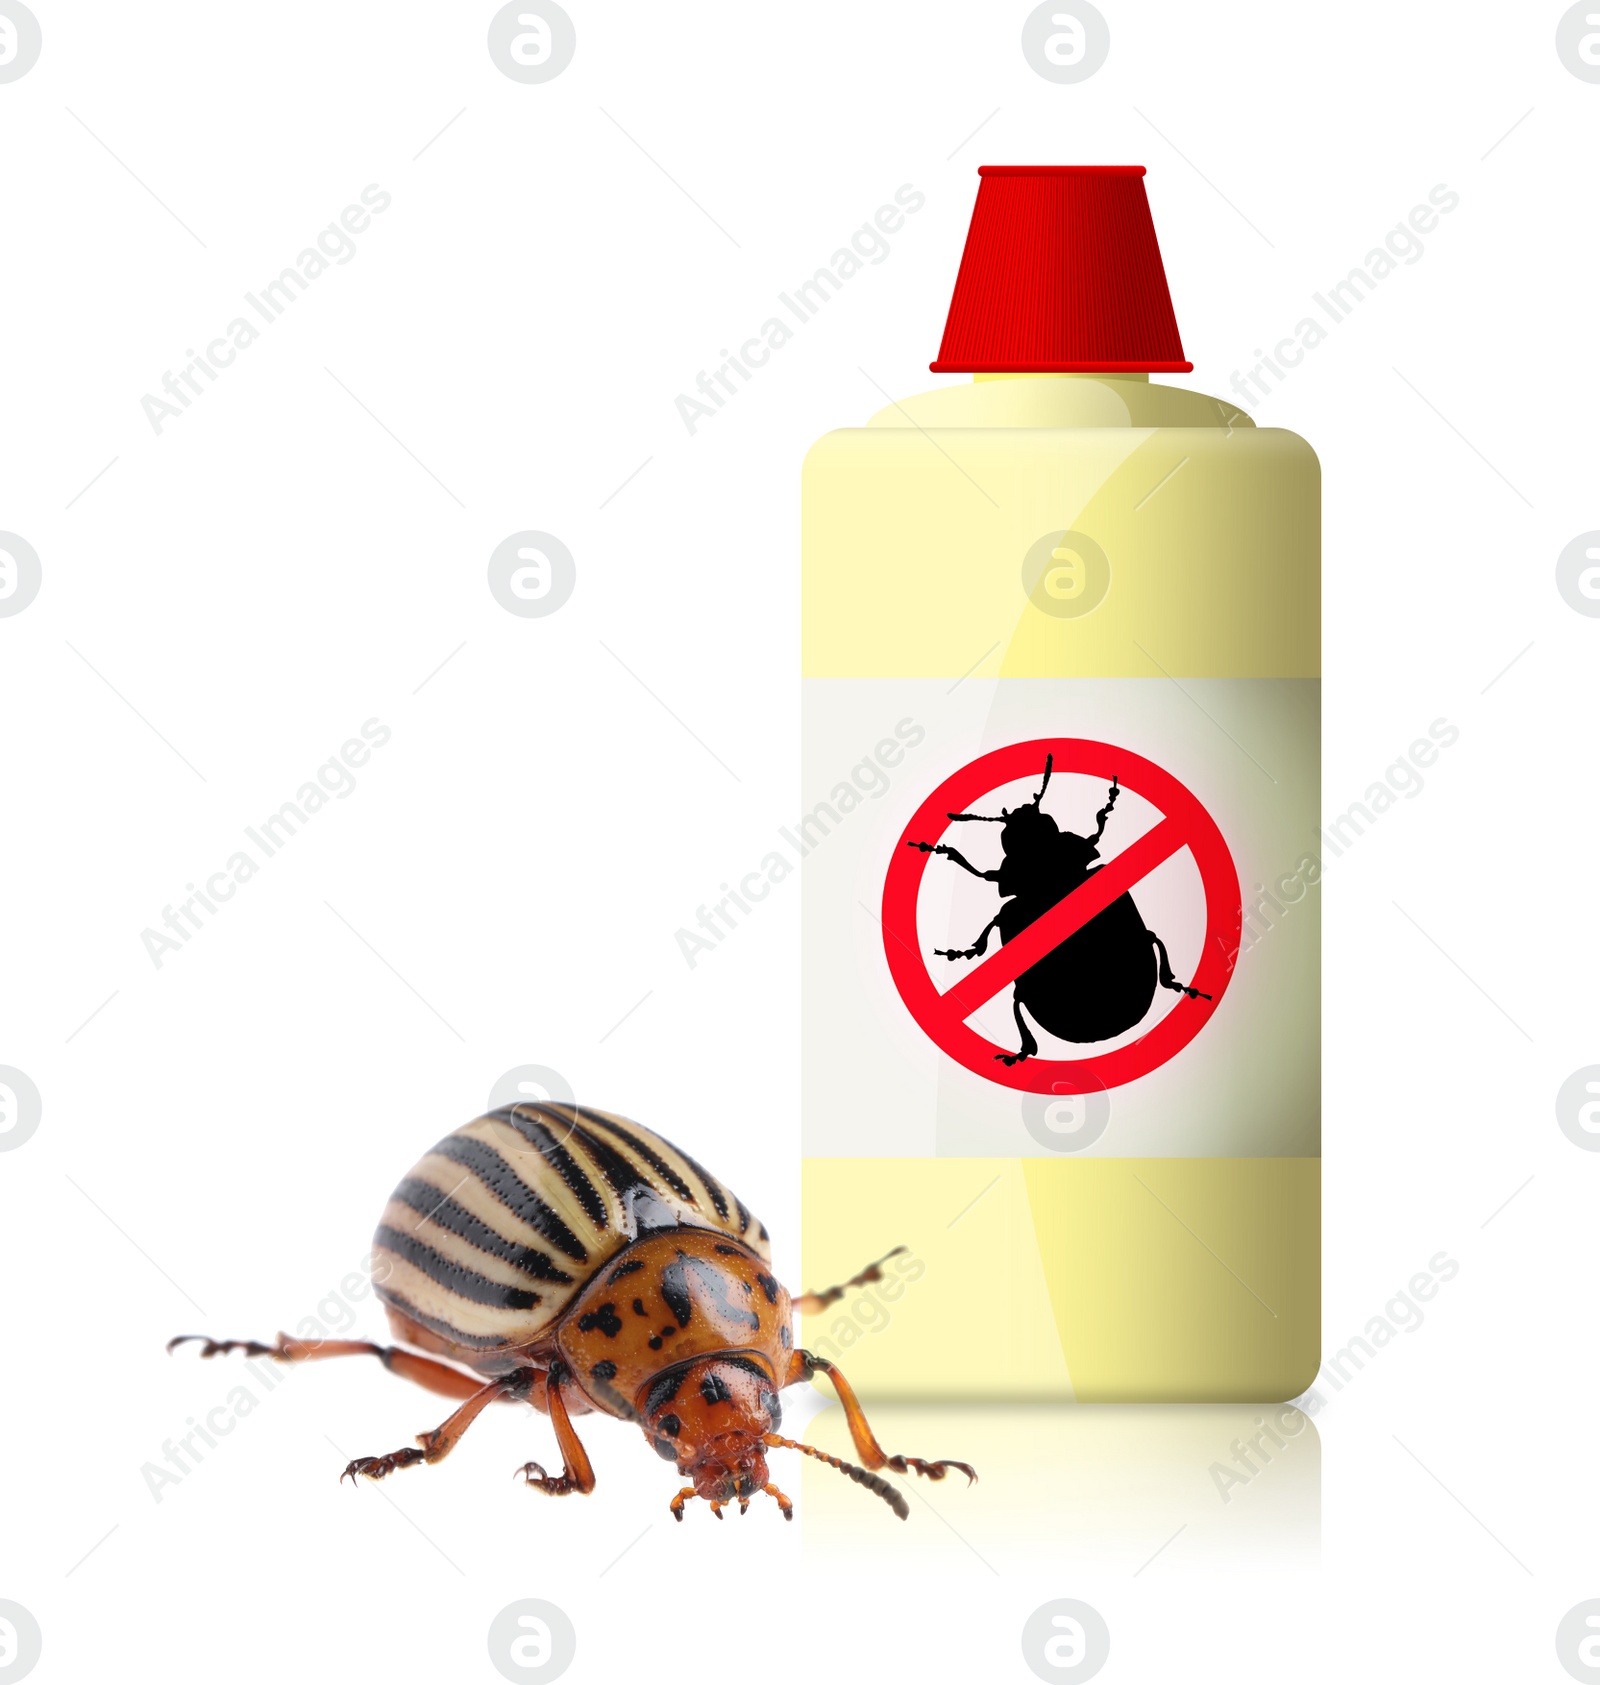 Image of Insecticide and Colorado potato beetle on white background